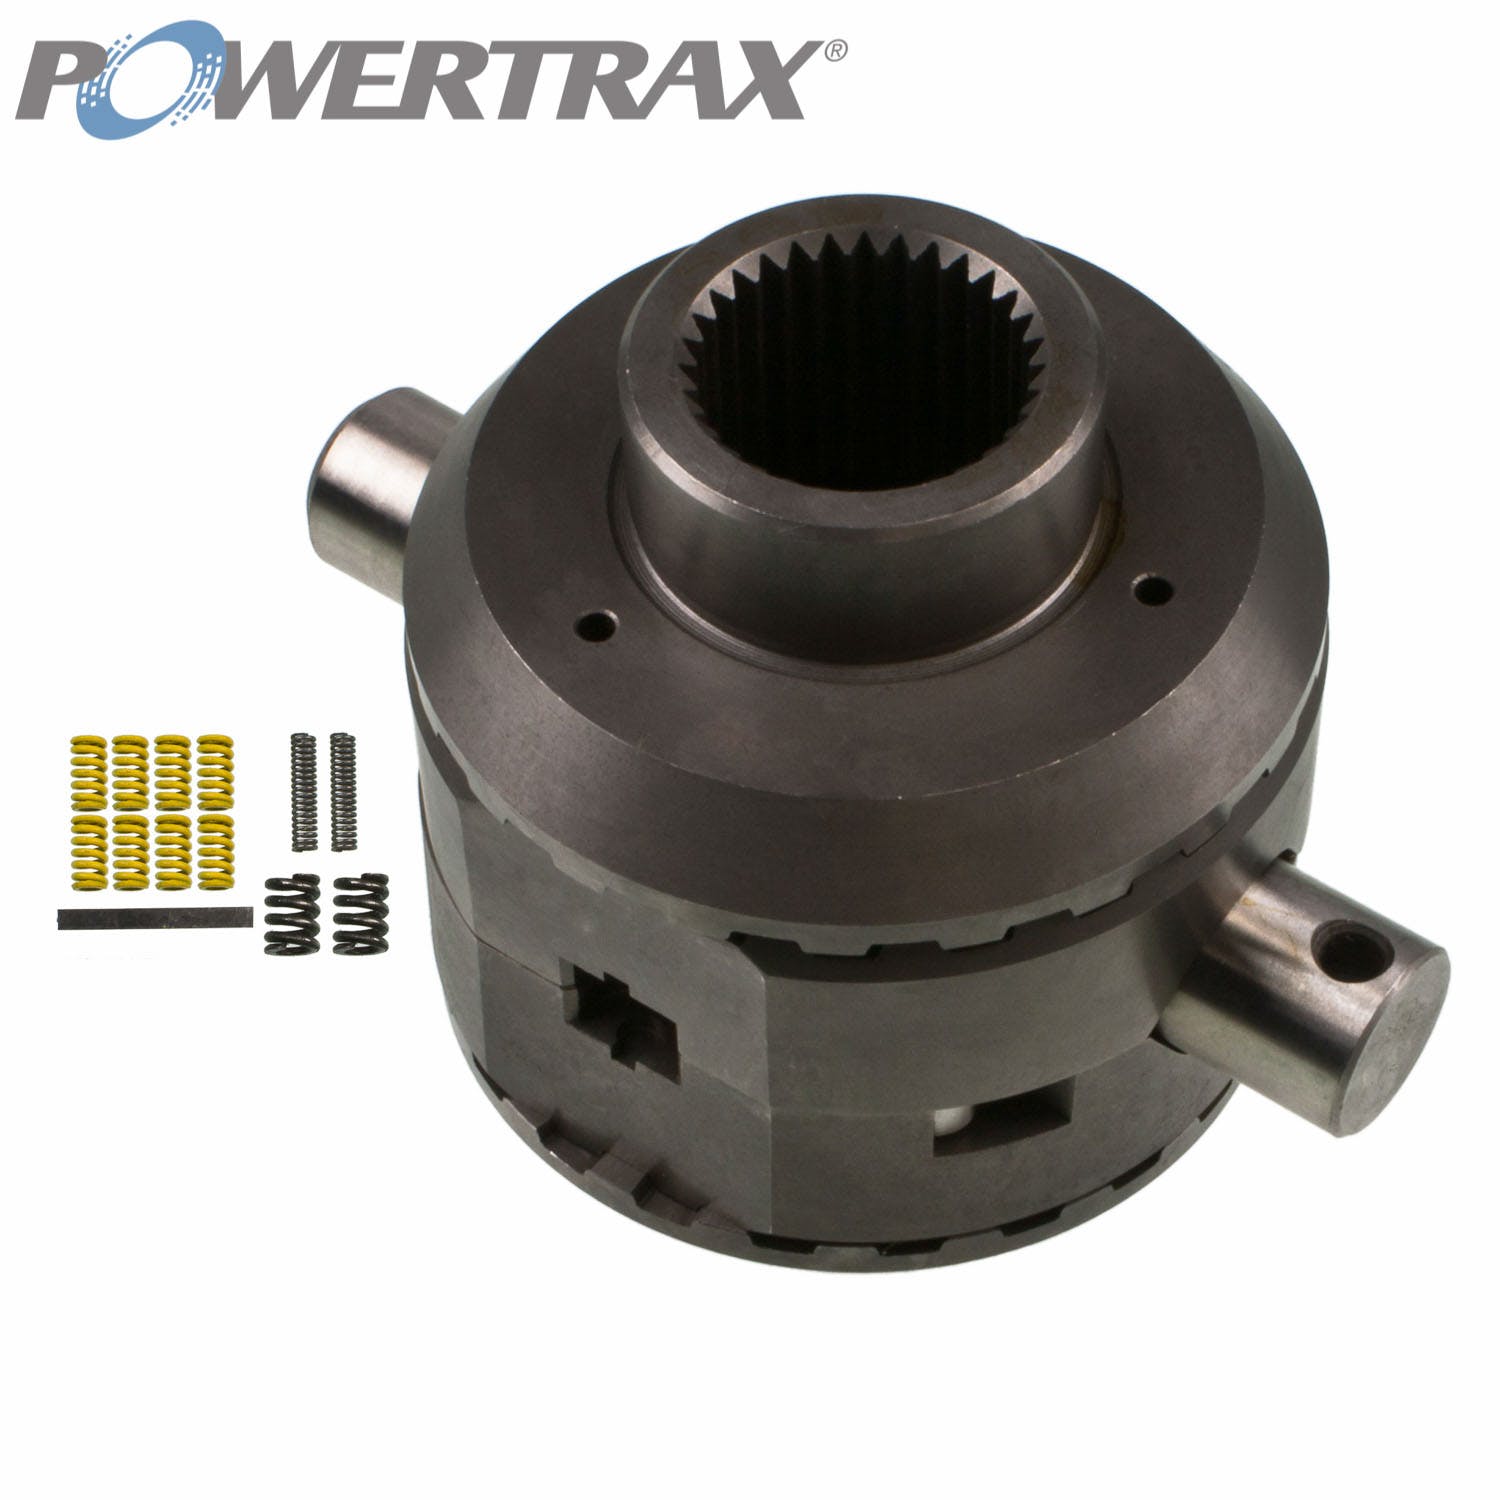 PowerTrax 9203923105 No-Slip Traction System